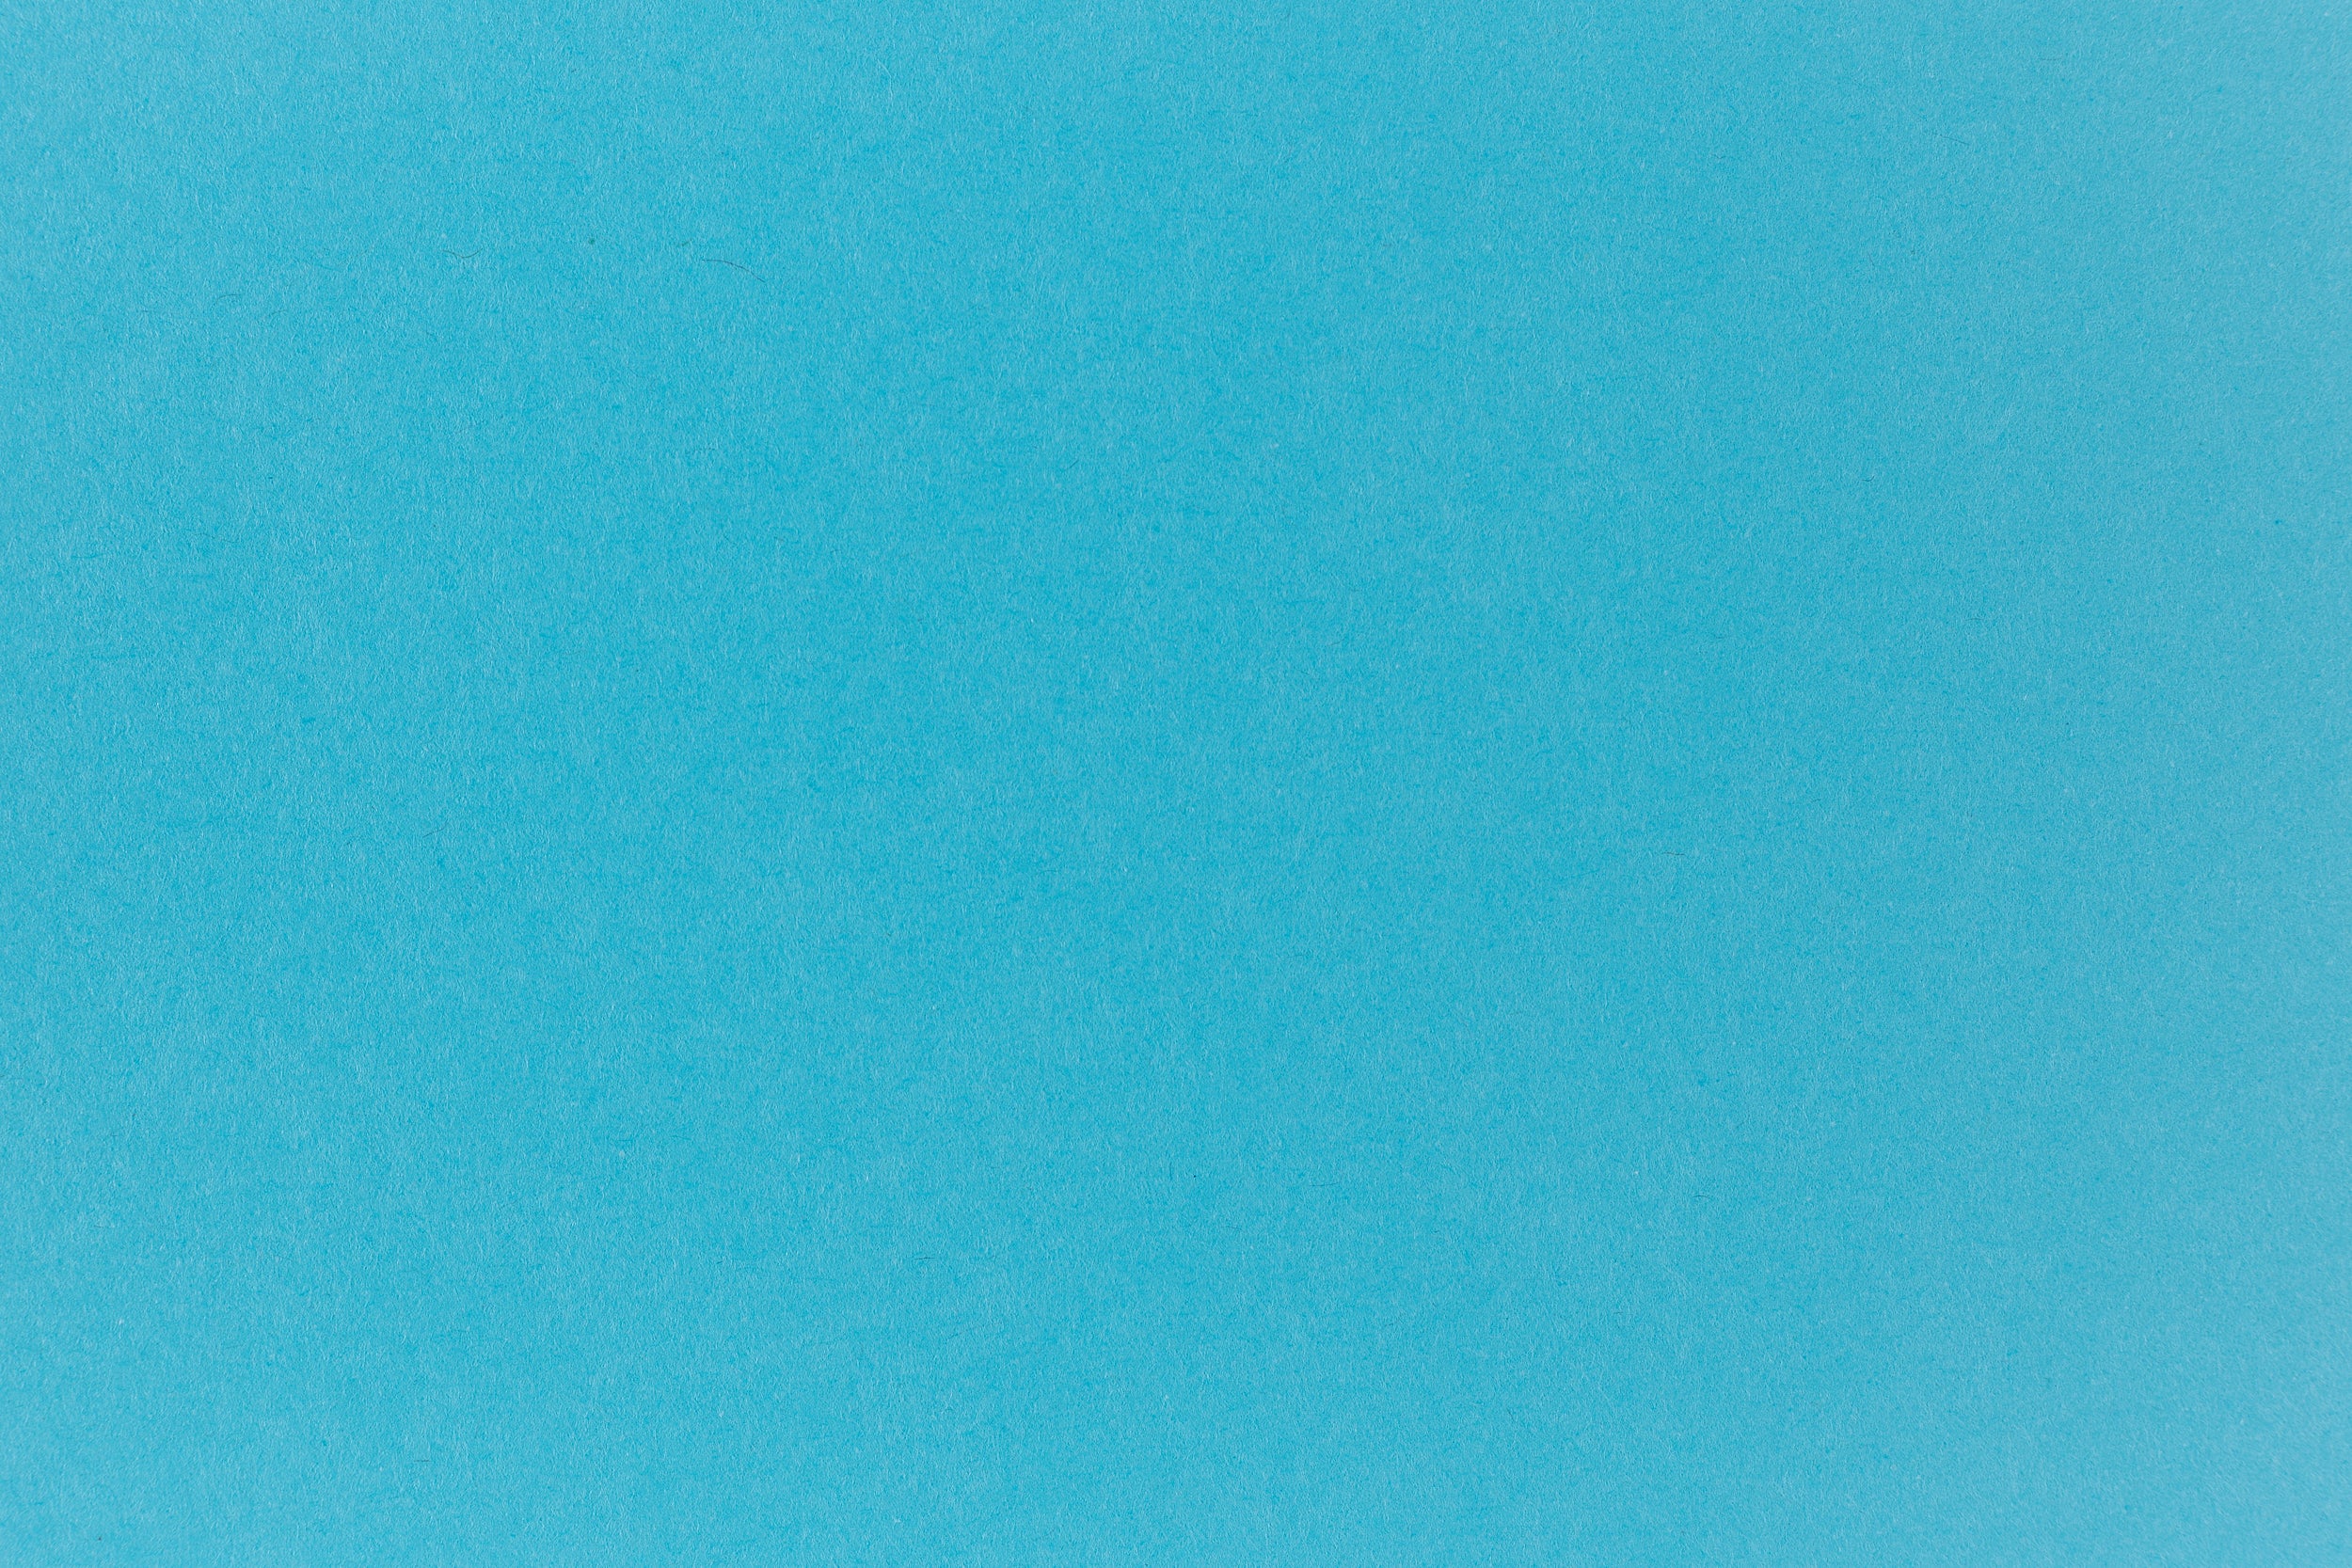 Sno Cone Cardstock - Light Blue Cover Weight Paper - Pop-Tone